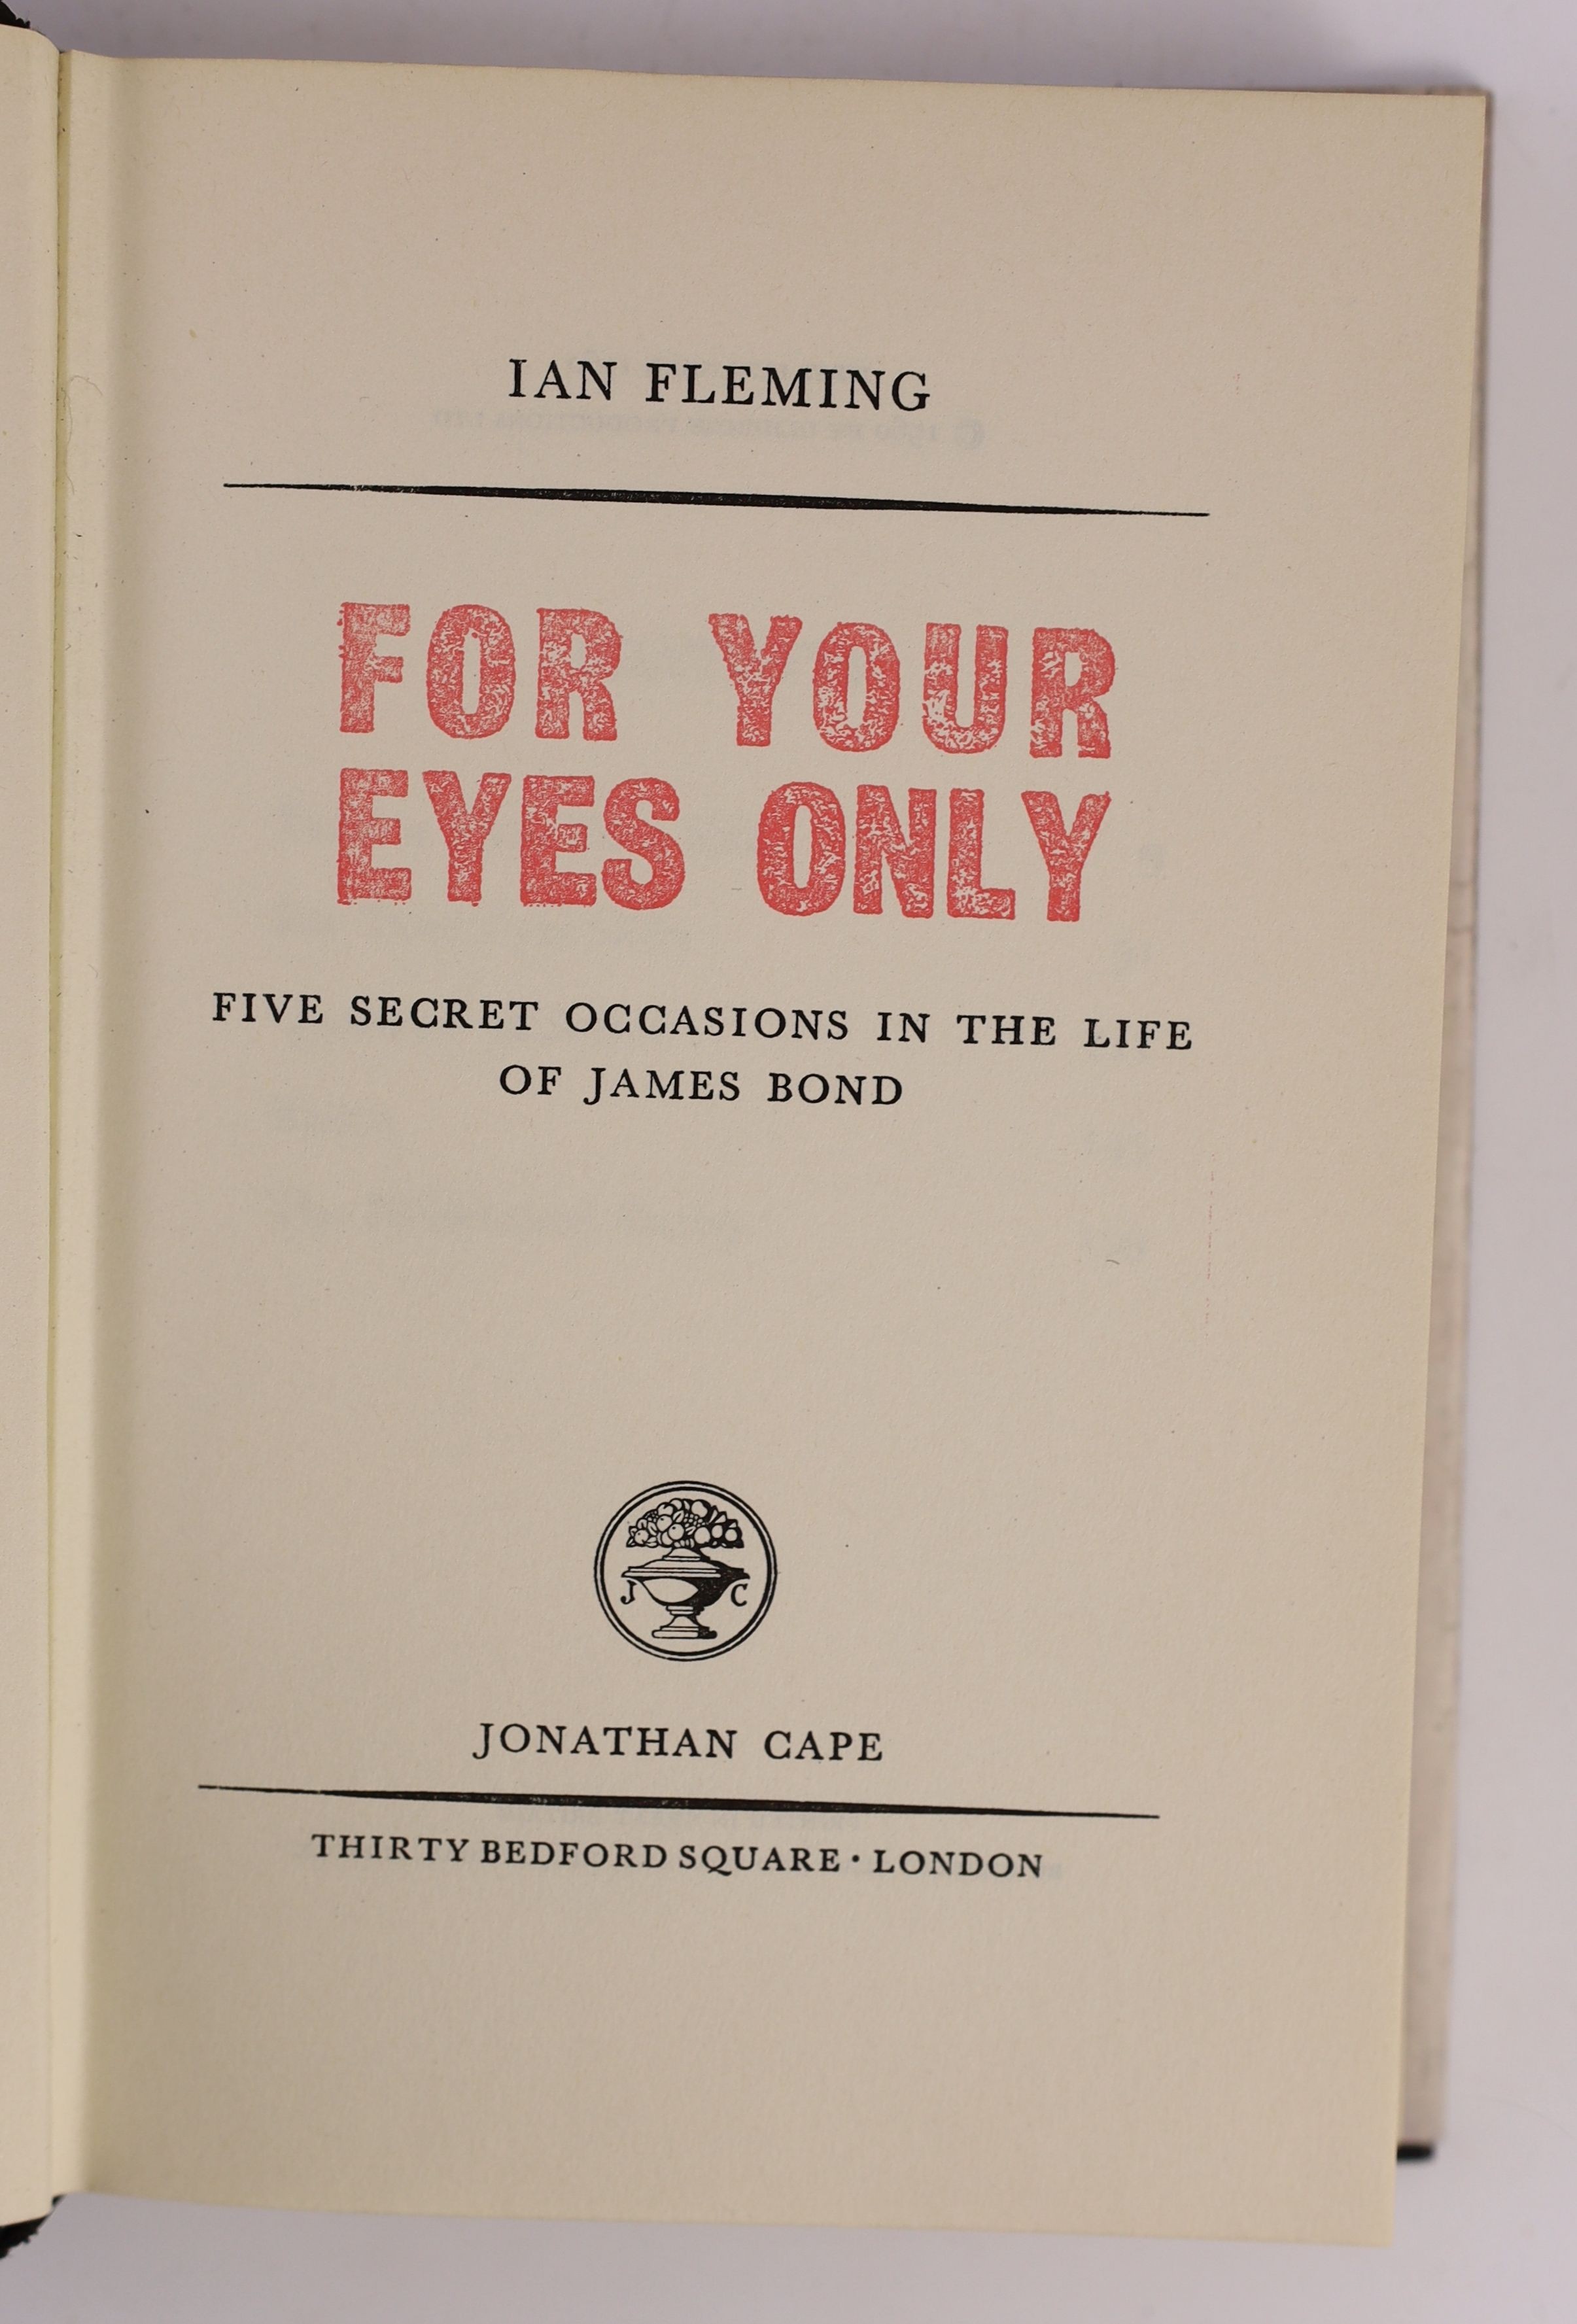 Fleming, Ian - 3 works:- From Russia with Love, 8vo, cloth, 1957; For Your Eyes Only, with facsimile d/j, 1960 and The Golden Gun, with facsimile d/j, 1965